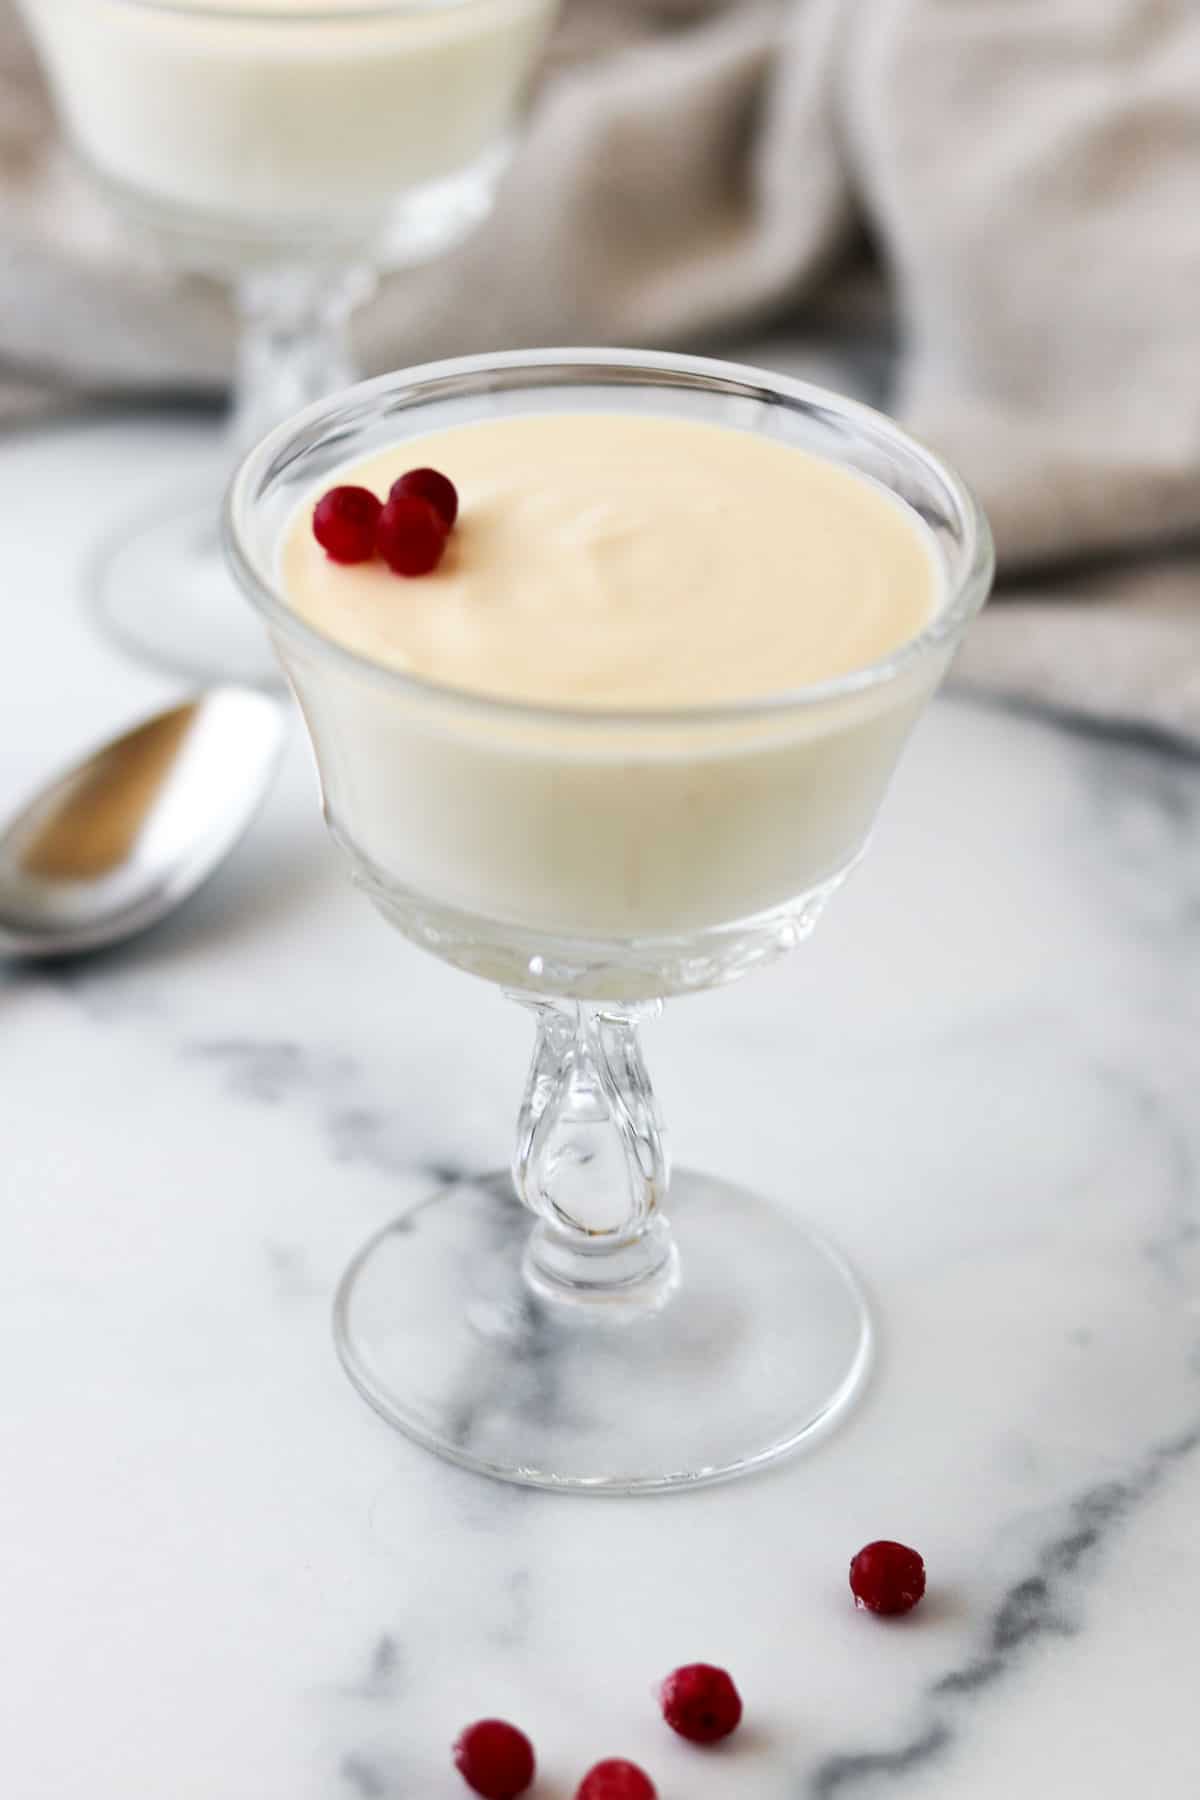 Swedish Cream in a stemmed glass topped with lingonberries and next to a spoon.